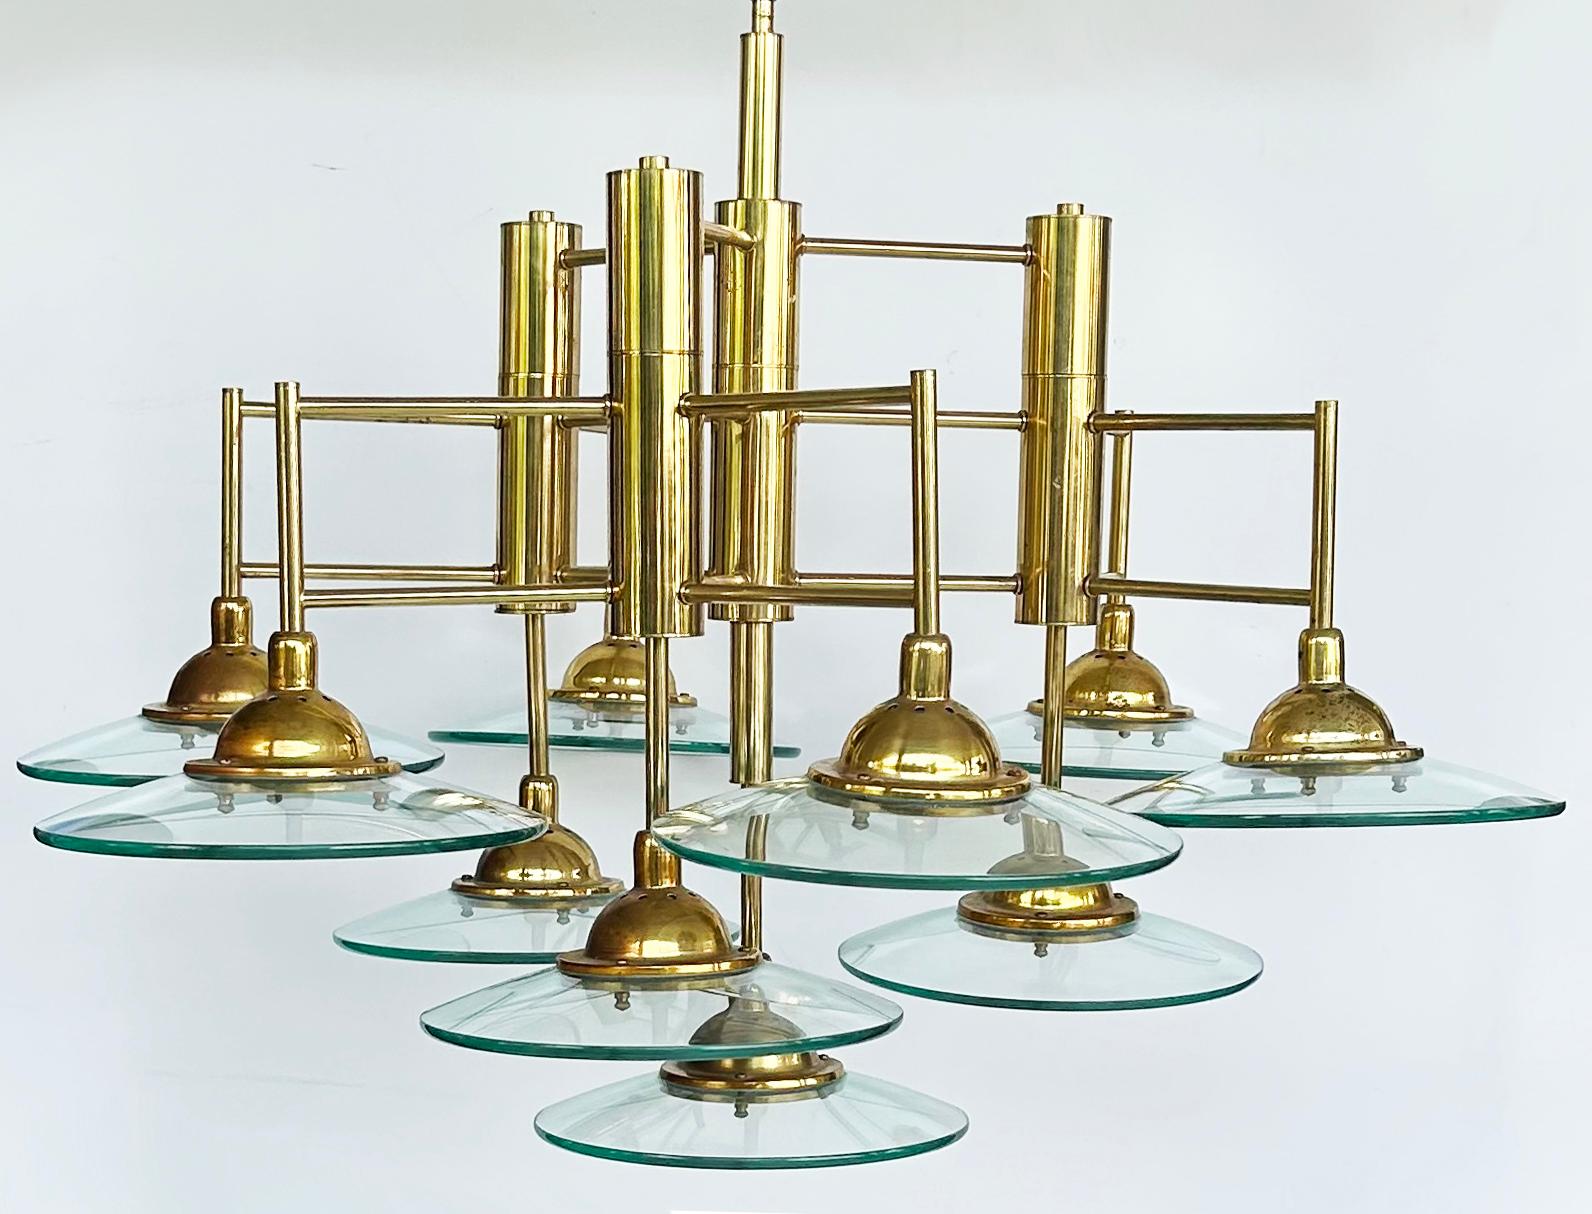 Vintage Modern Brass and Glass 10-Light Chandelier

Offered for sale is an unusual modern multi-tiered chandelier in brass with glass disks. The chandelier has 10 lights each surrounded by thick glass disks. It does not have the original canopy but